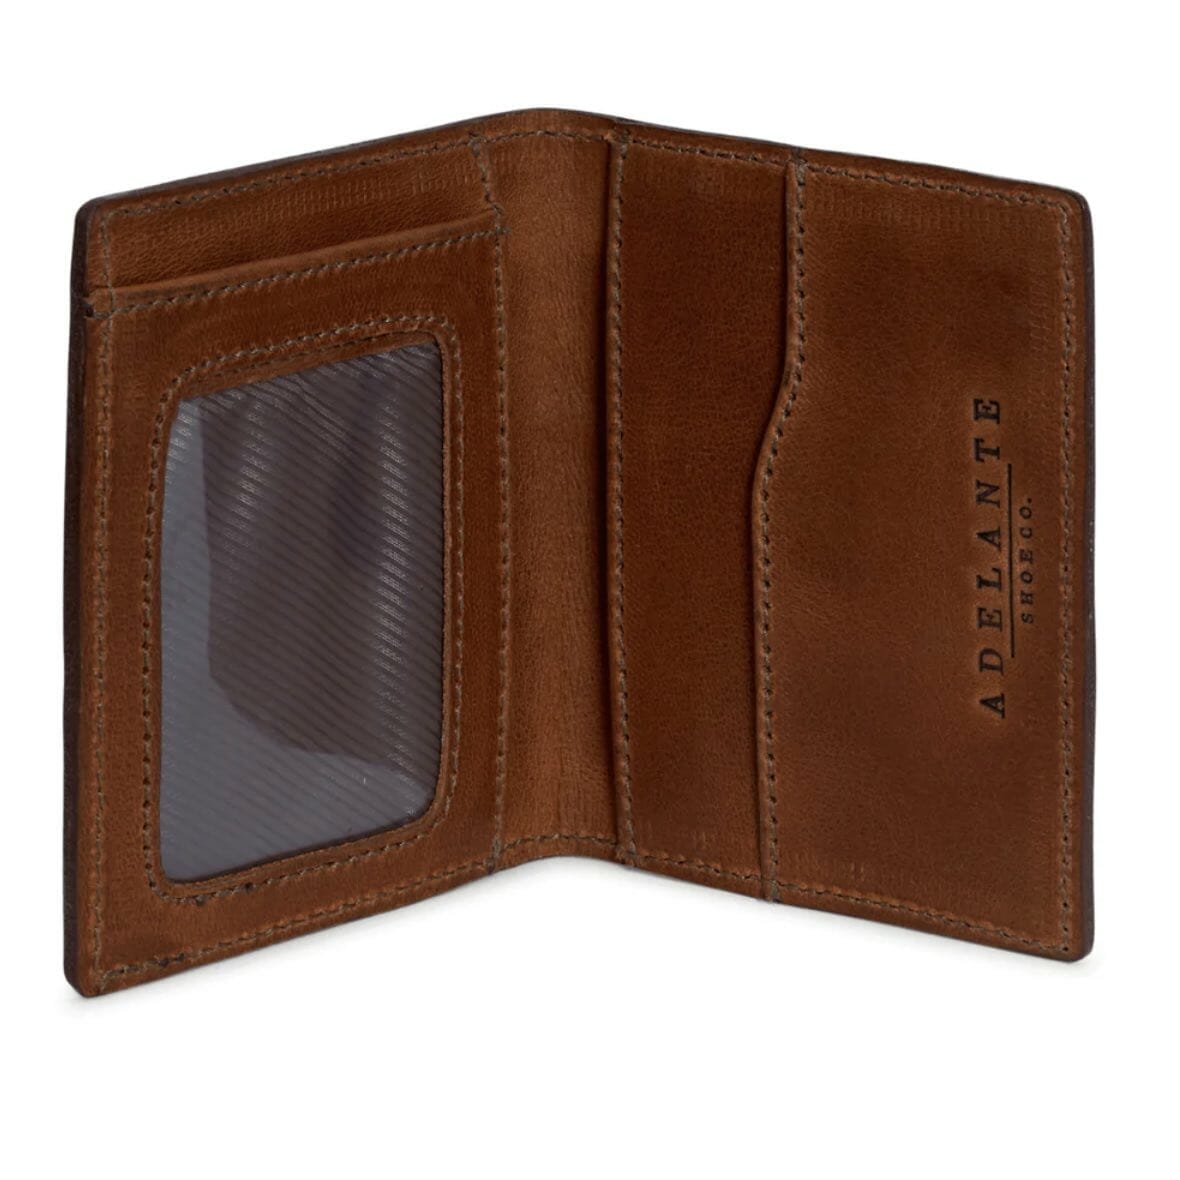 Adelante-Card-Wallet-ethical-christmas-gift-